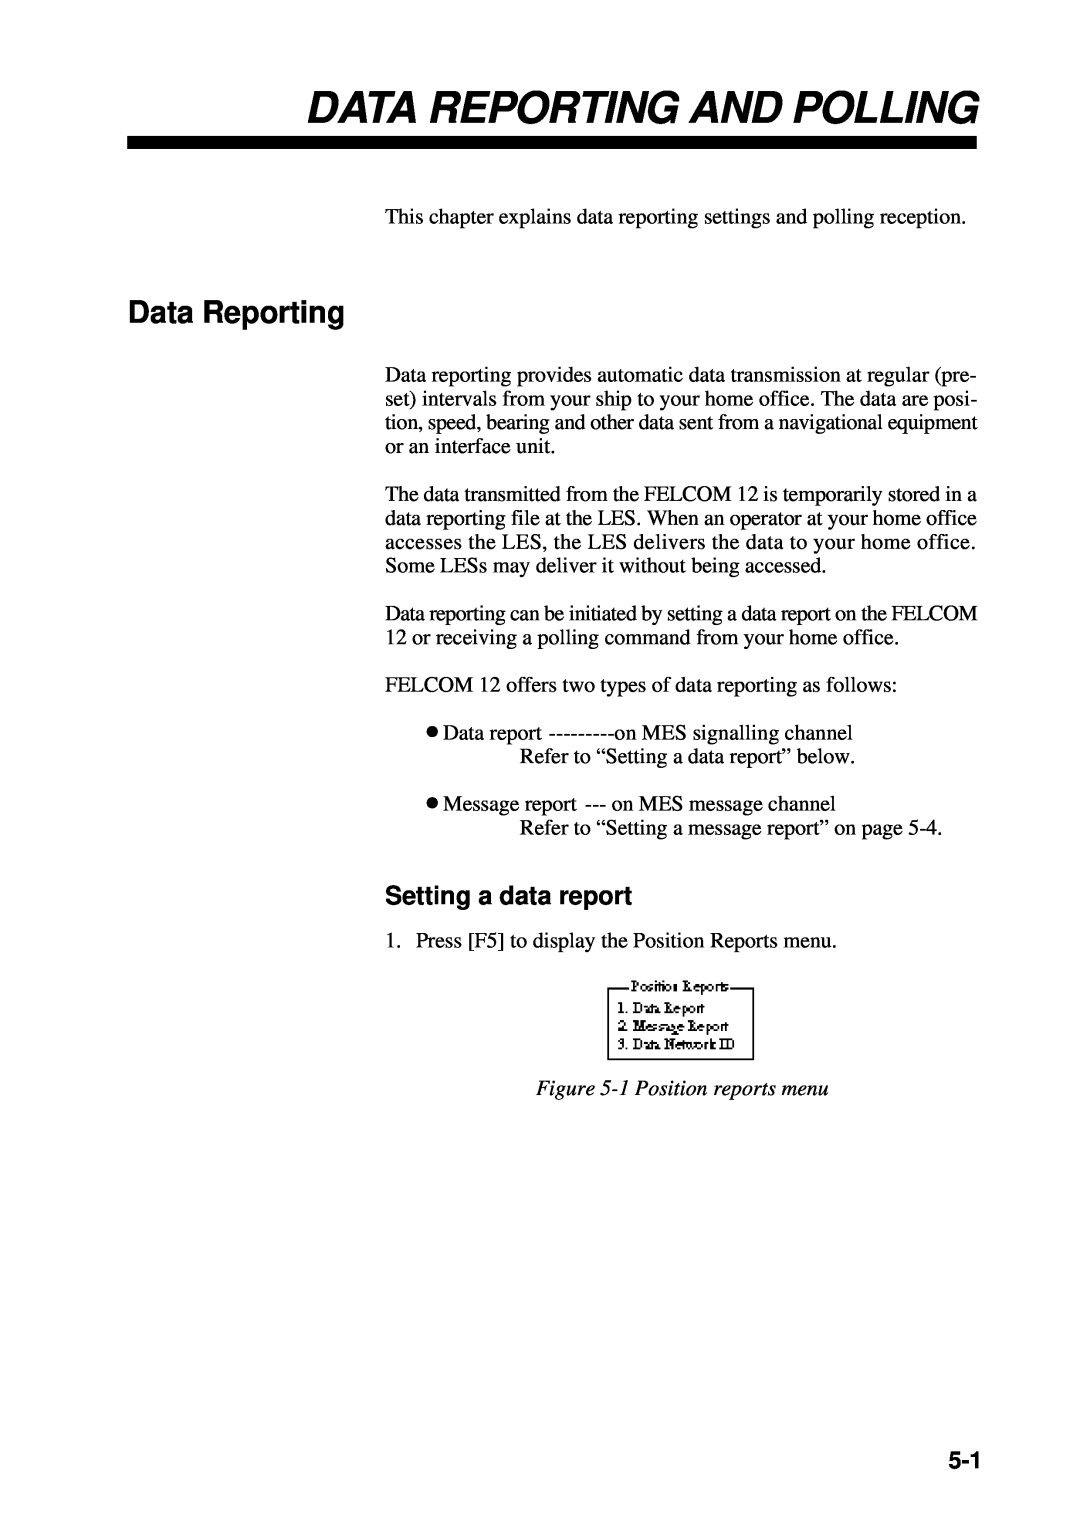 Furuno RC-1500-1T manual Data Reporting And Polling, Setting a data report, 1 Position reports menu 